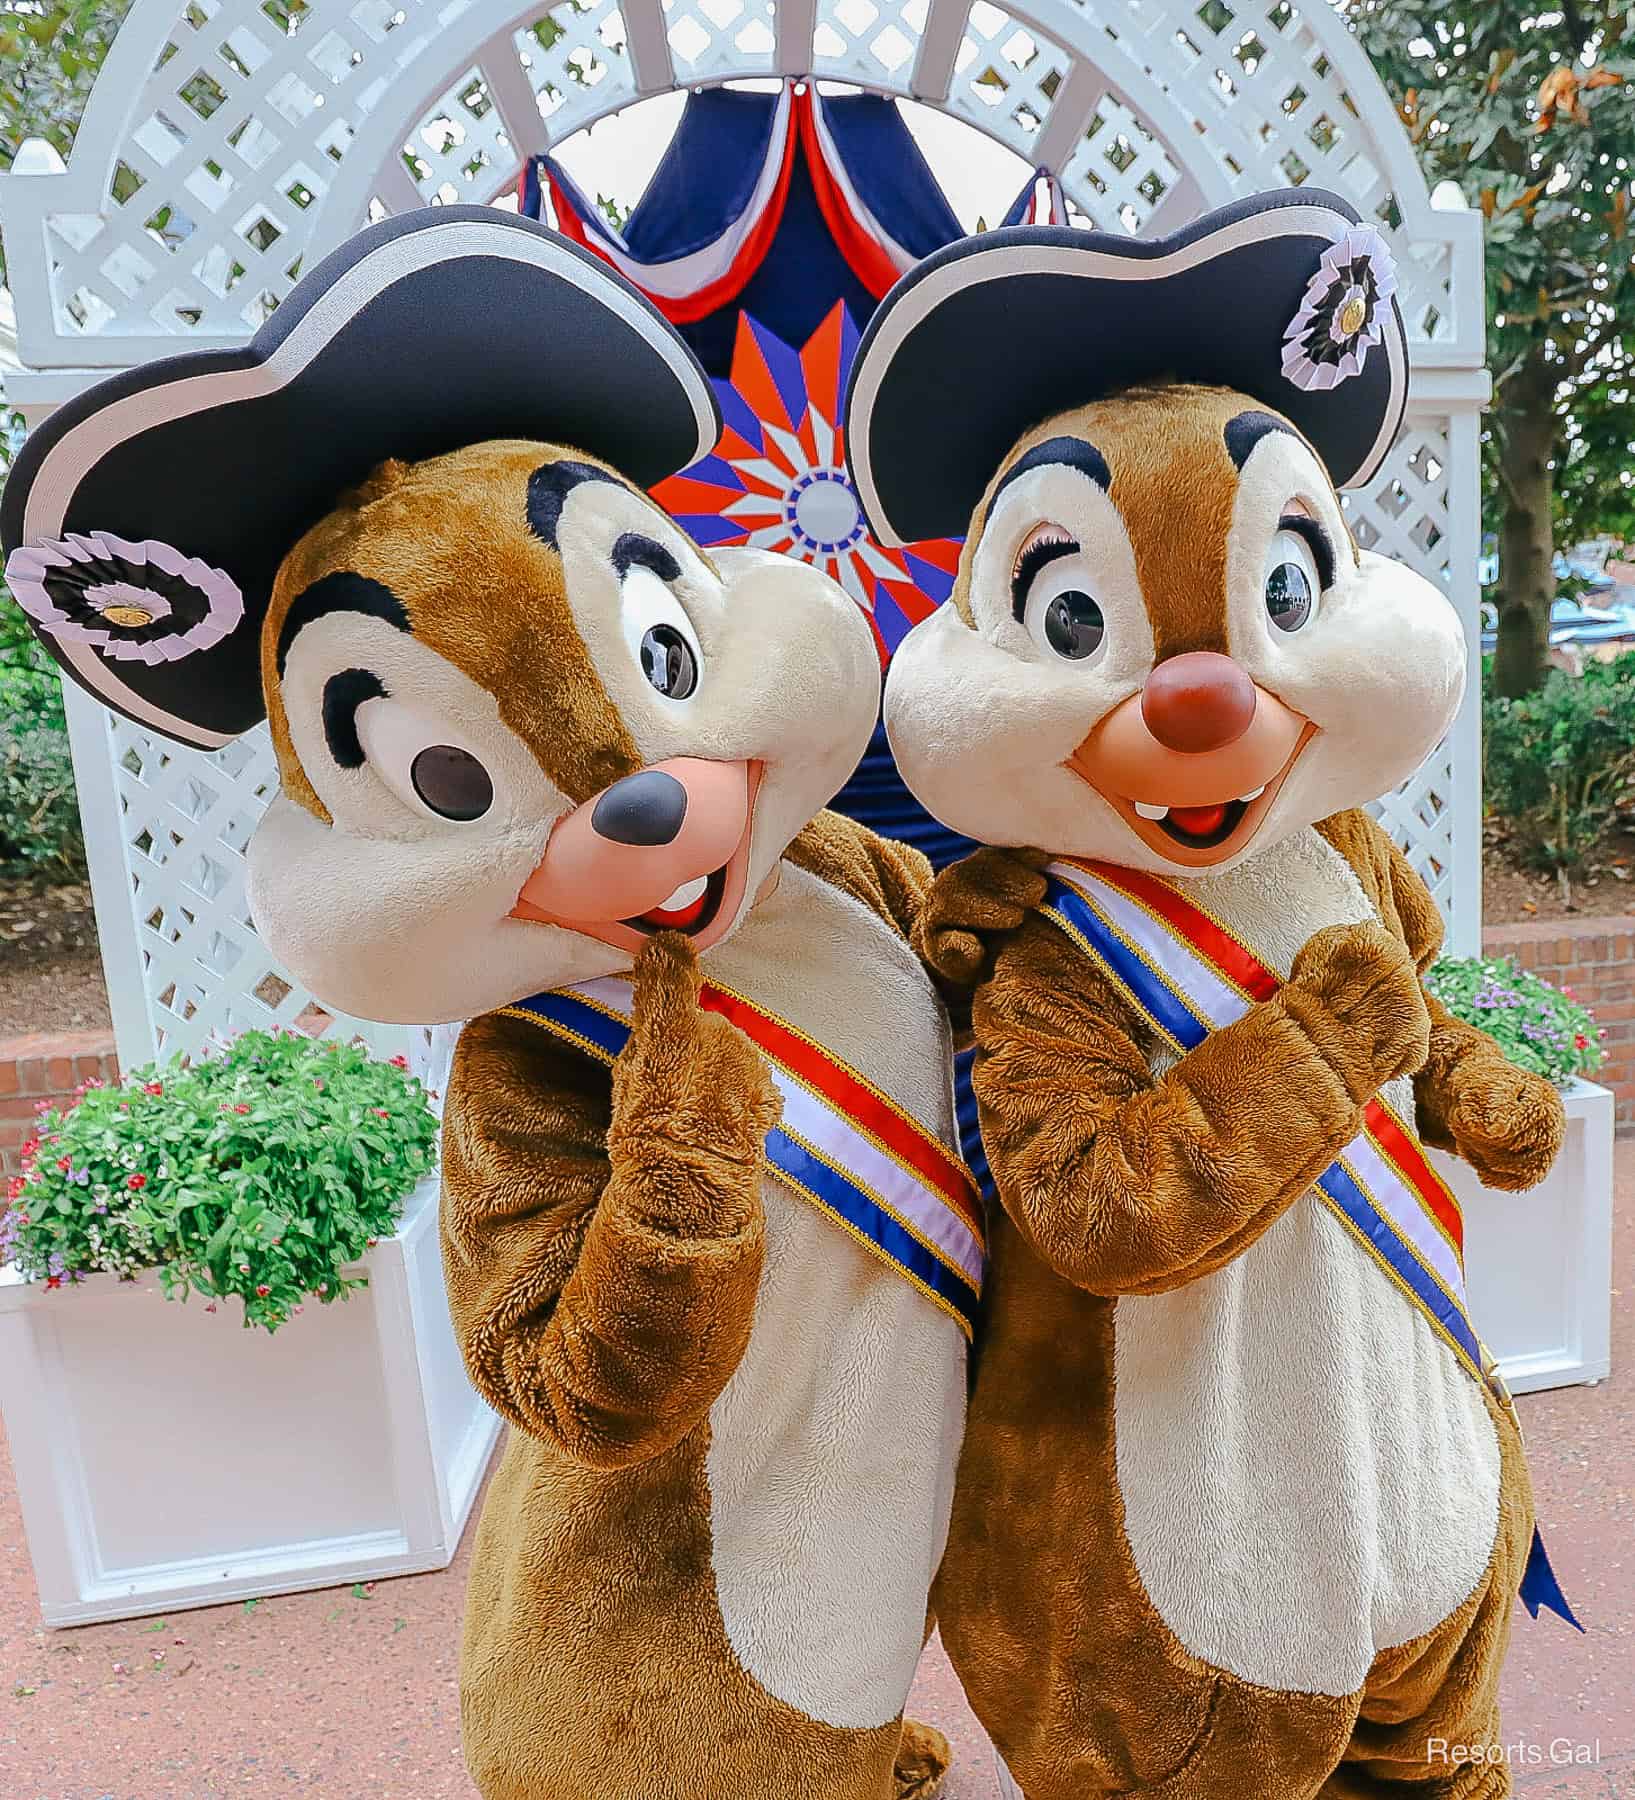 Chip and Dale at Epcot on the Fourth of July